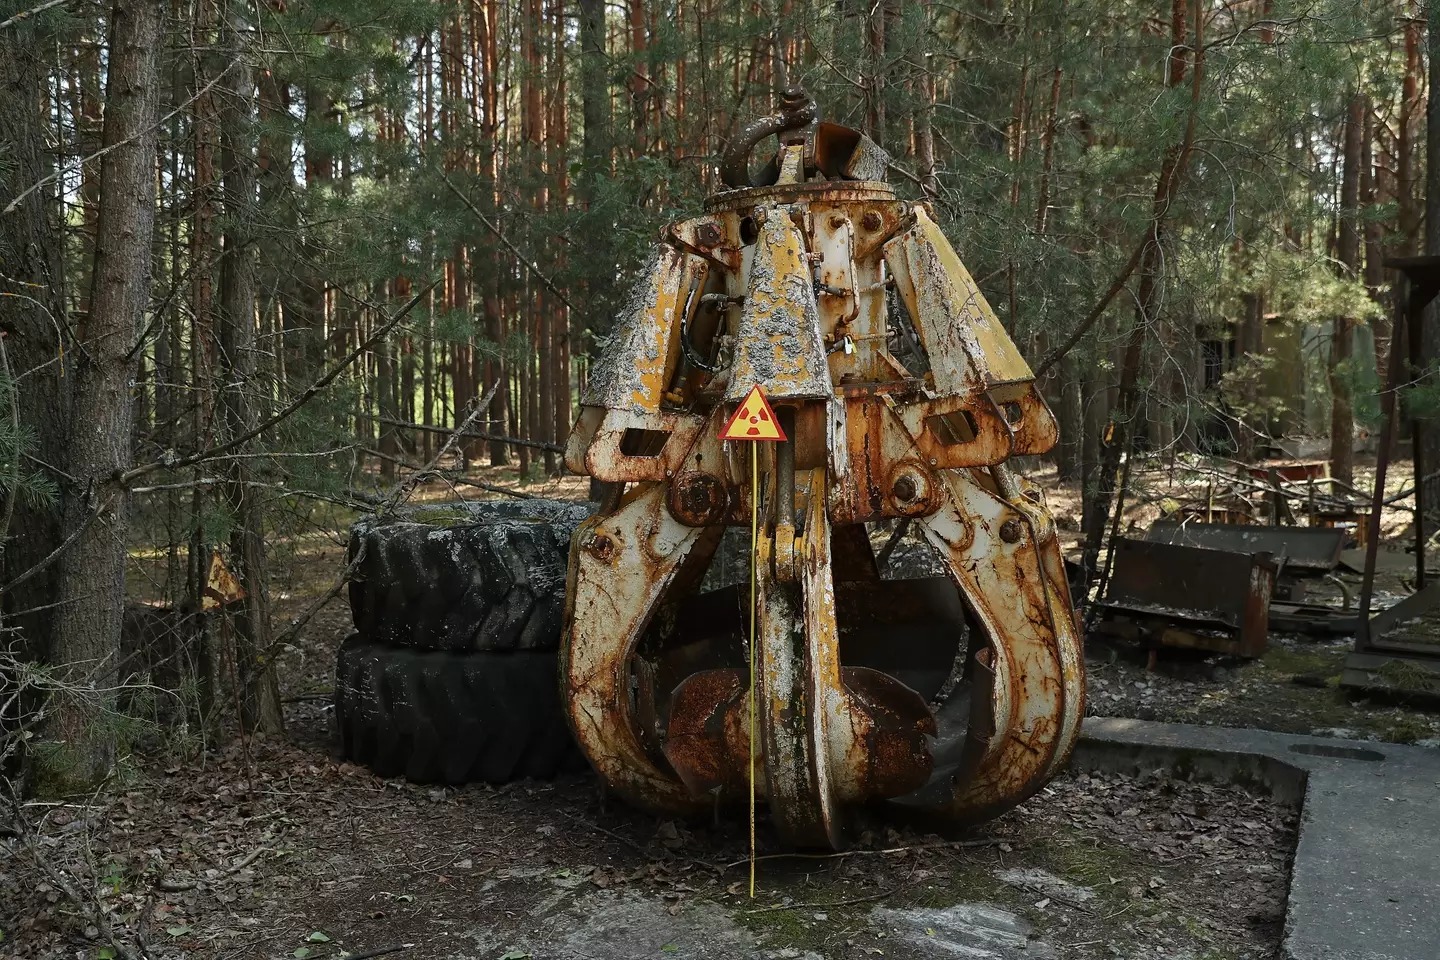 The Claw in Chernobyl. Sean Gallup/Getty Images